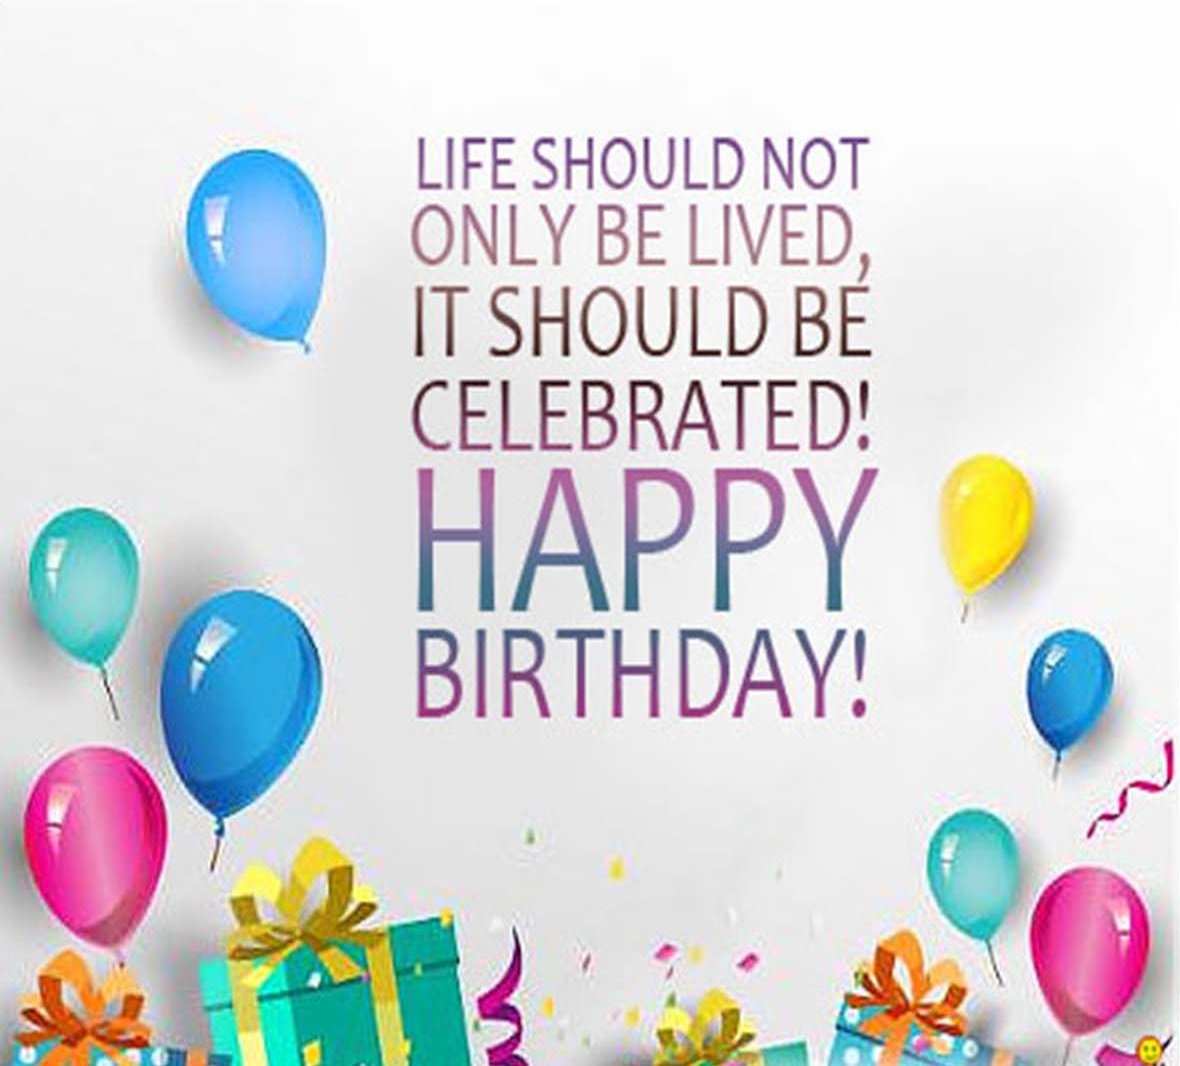 birthday wishes messages image hd